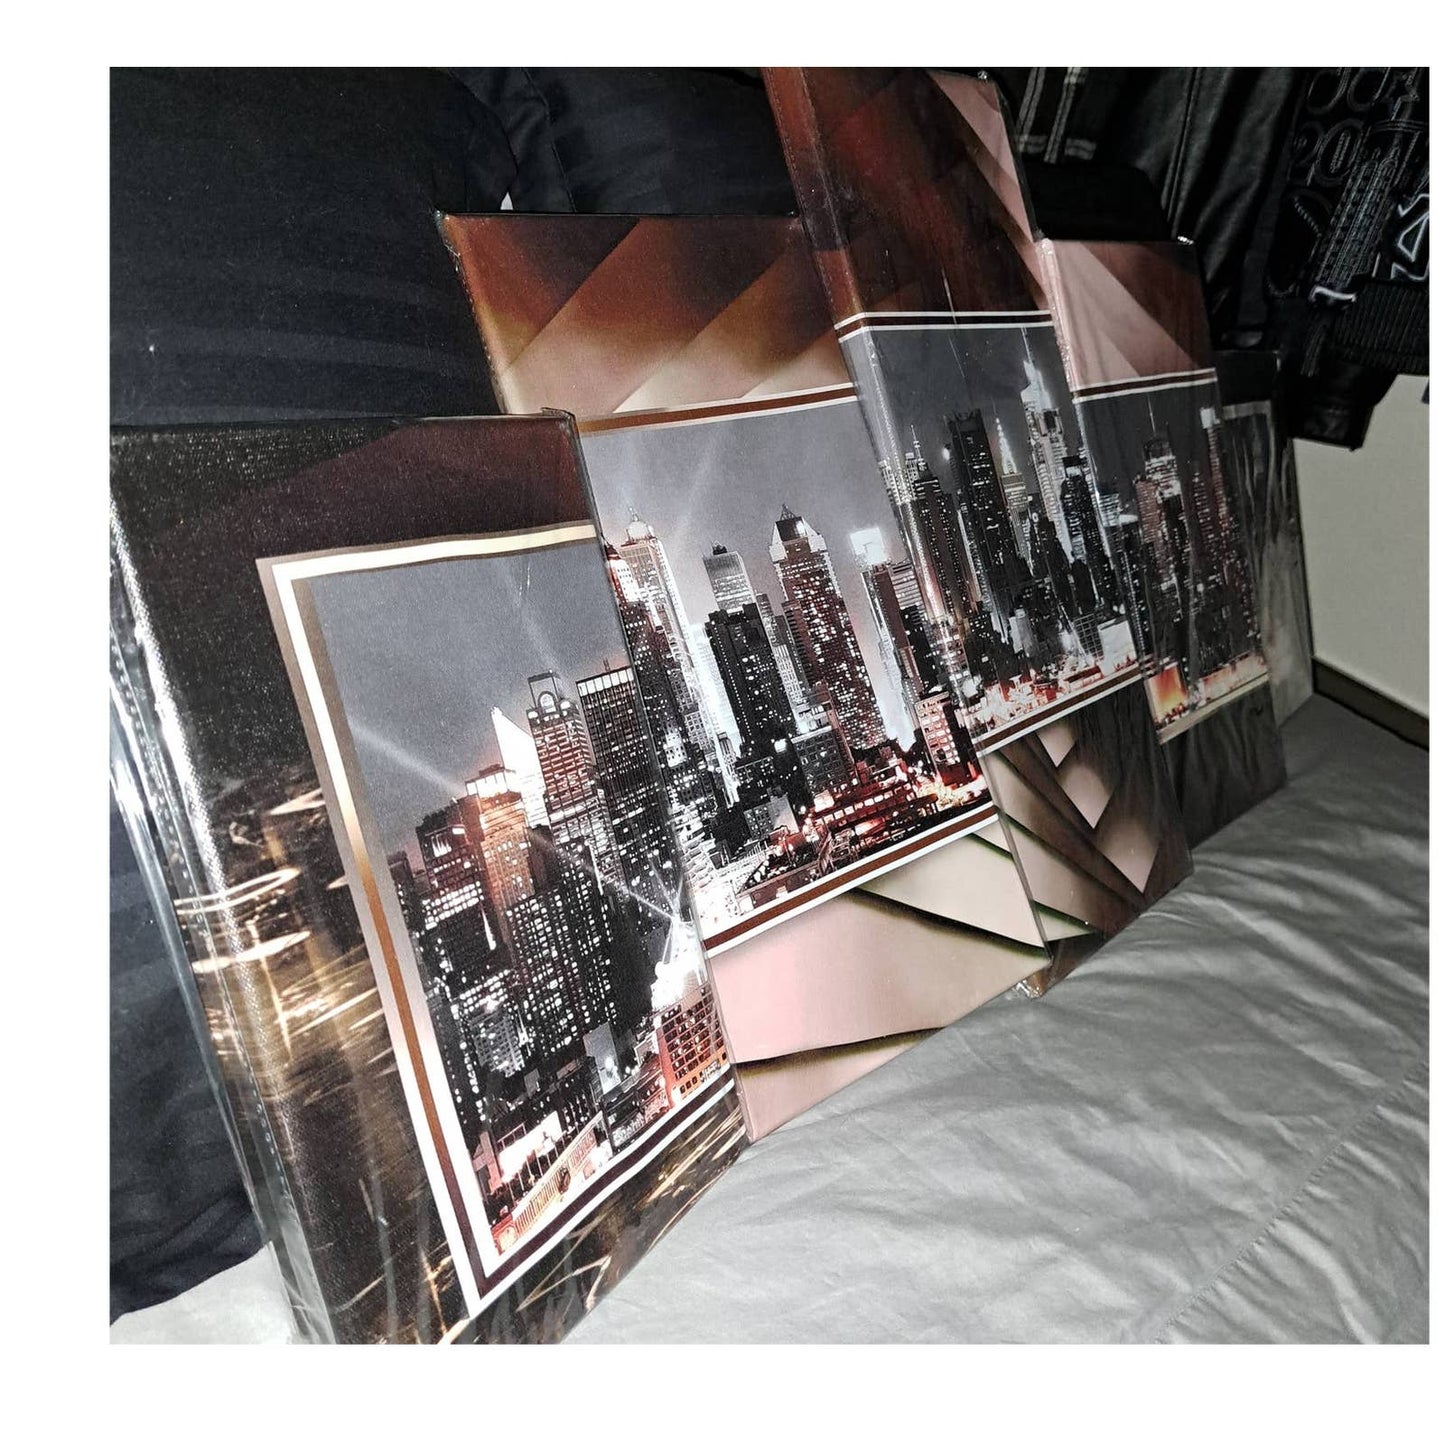 ALMOST 4 feet with 5 separate Modulor paintings NYC Skyline